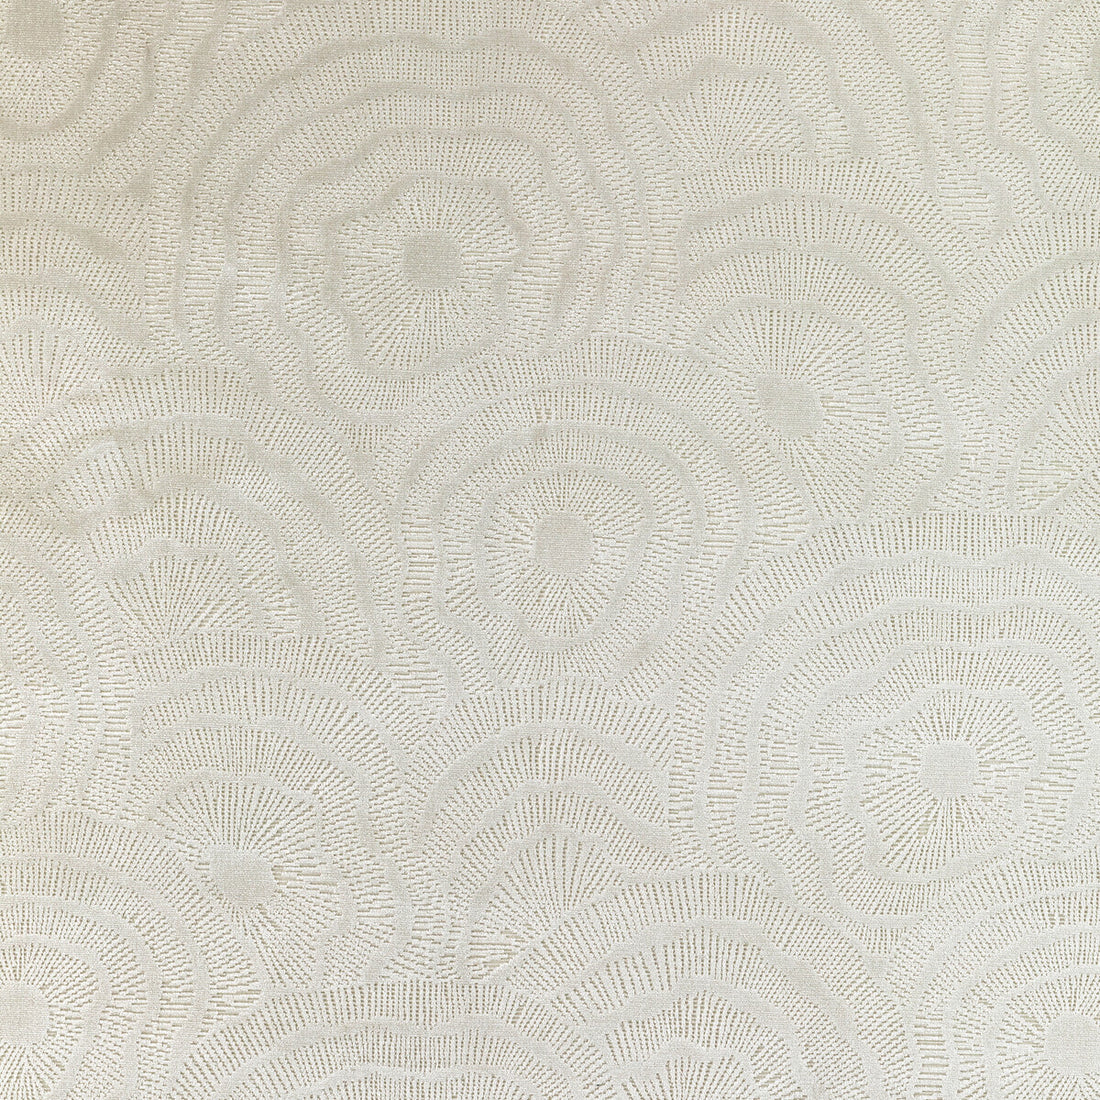 Panache Velvet fabric in ivory color - pattern 36366.1.0 - by Kravet Couture in the Corey Damen Jenkins Trad Nouveau collection